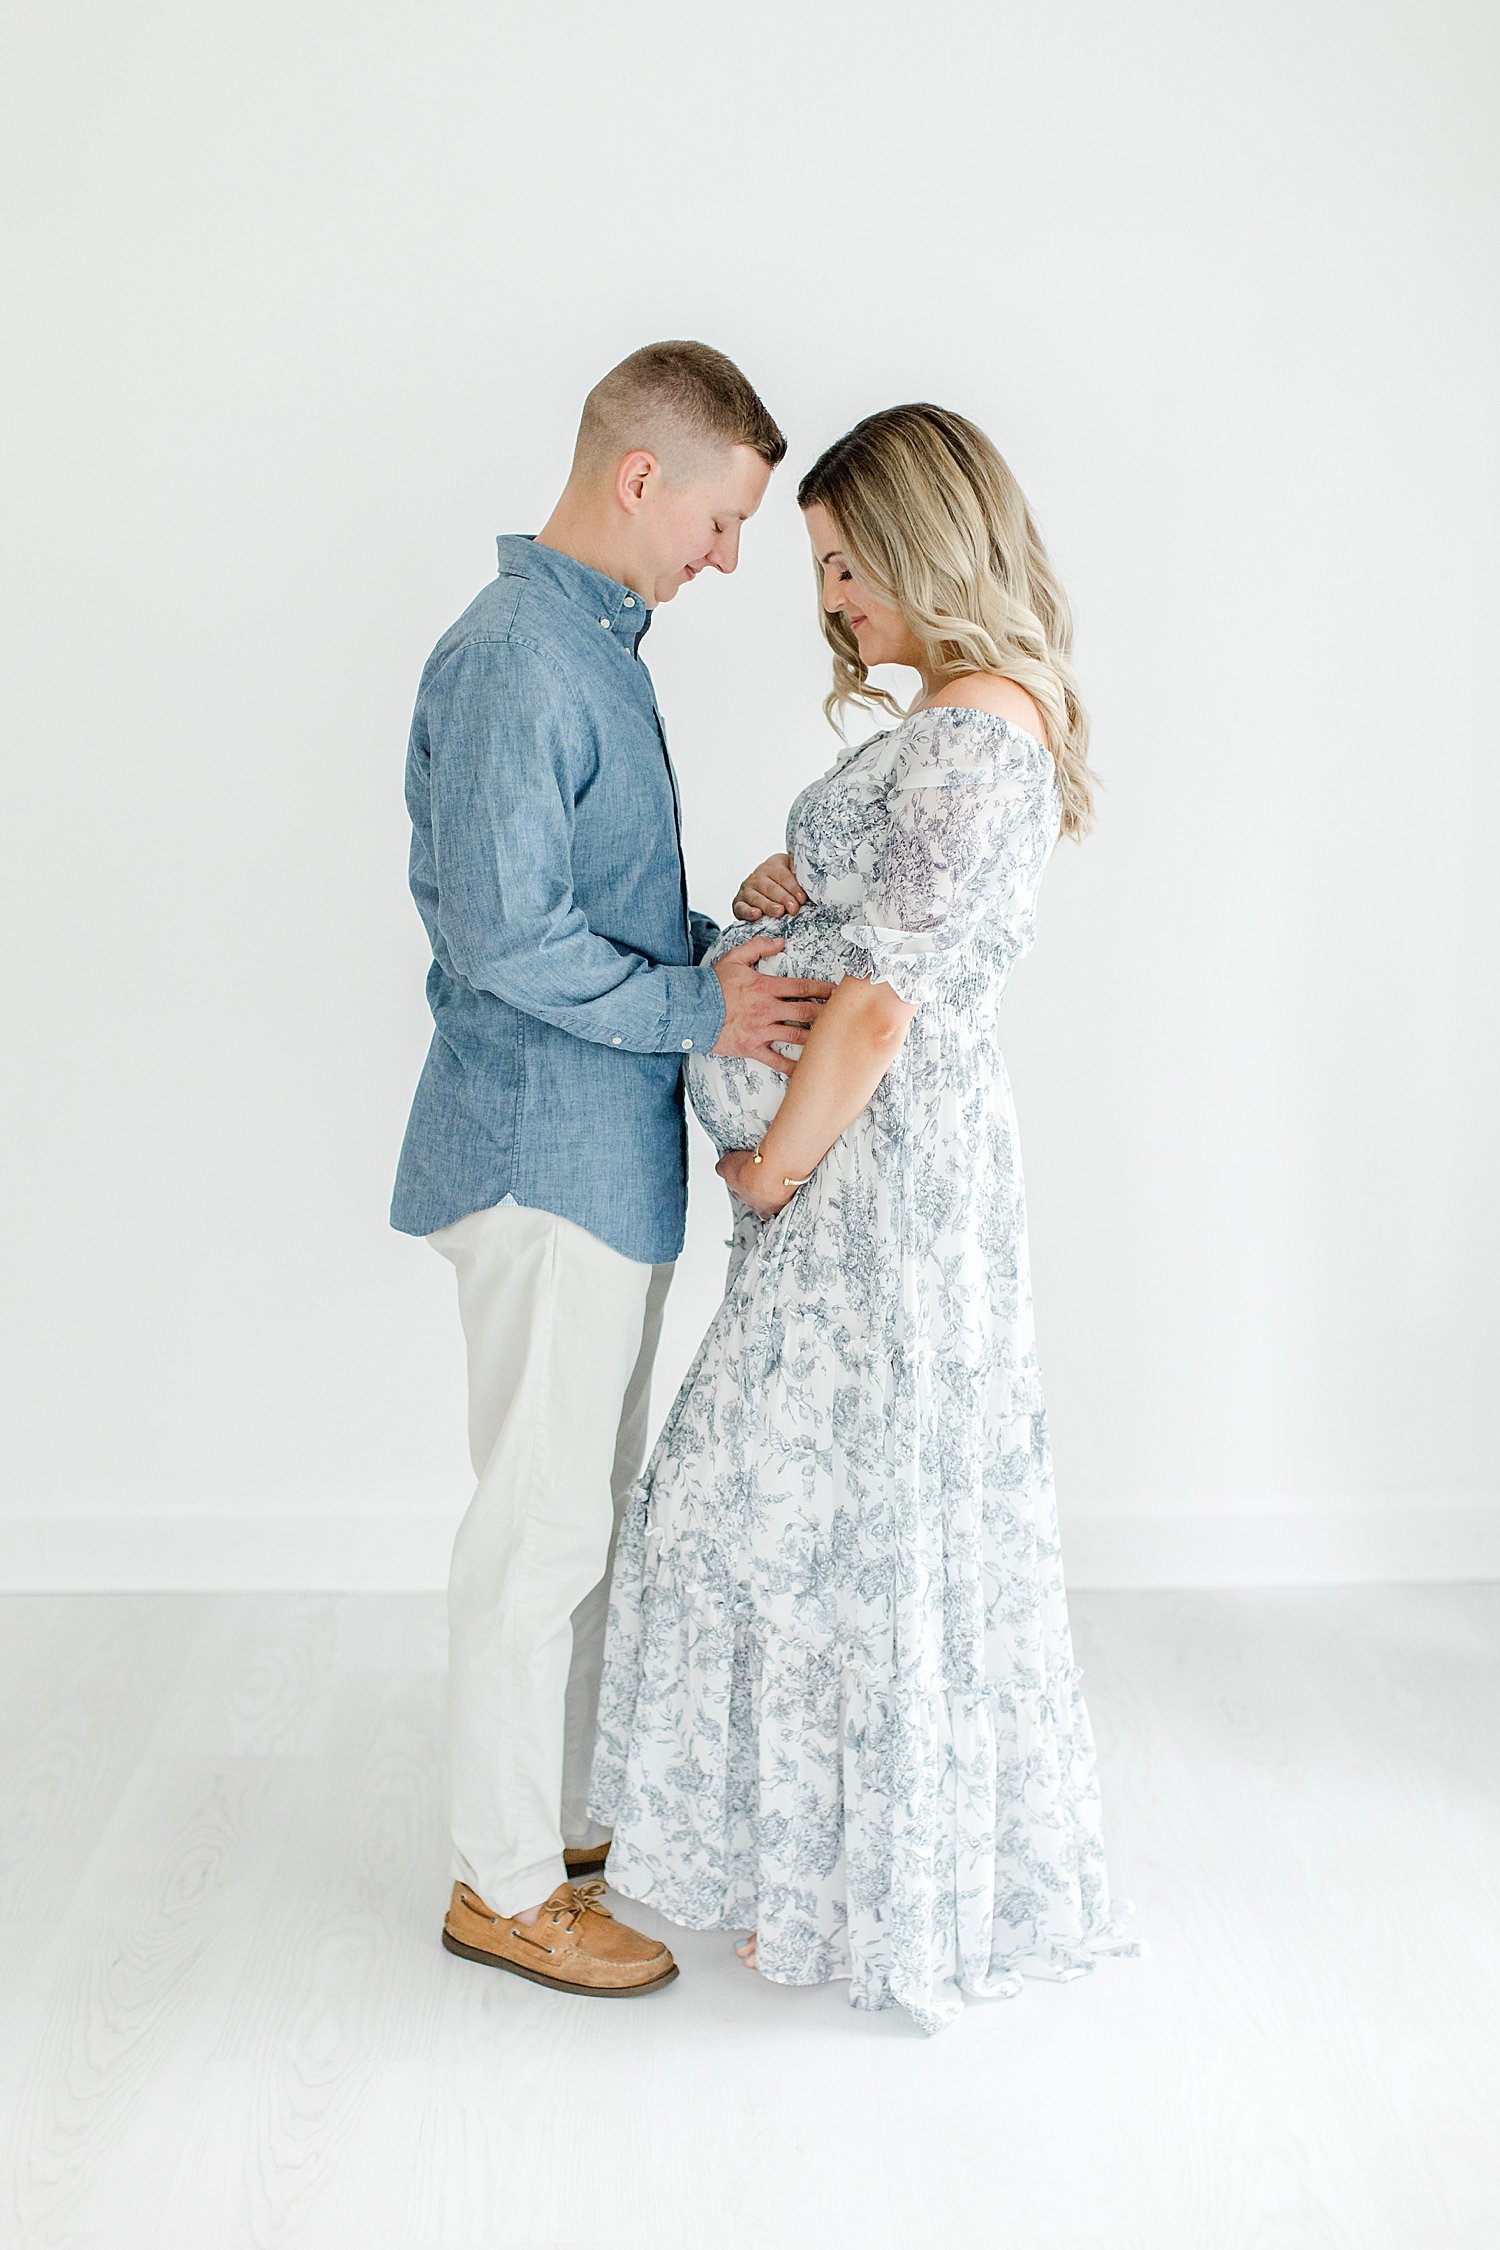 New parents celebrate pregnancy with photoshoot in studio in Westport with Kristin Wood Photography.